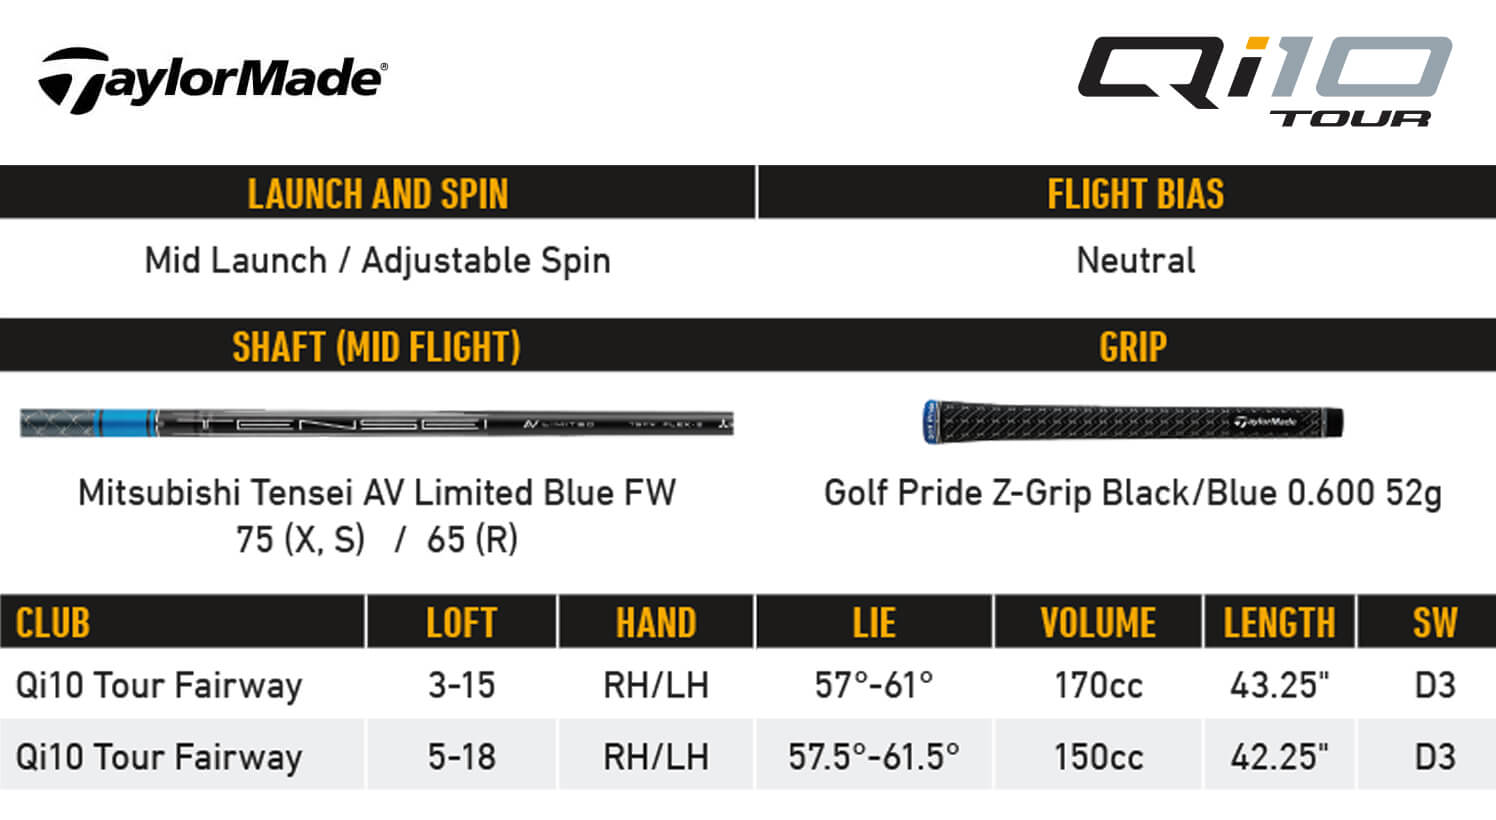 Specification for TaylorMade Qi10 Tour Fairway Woods